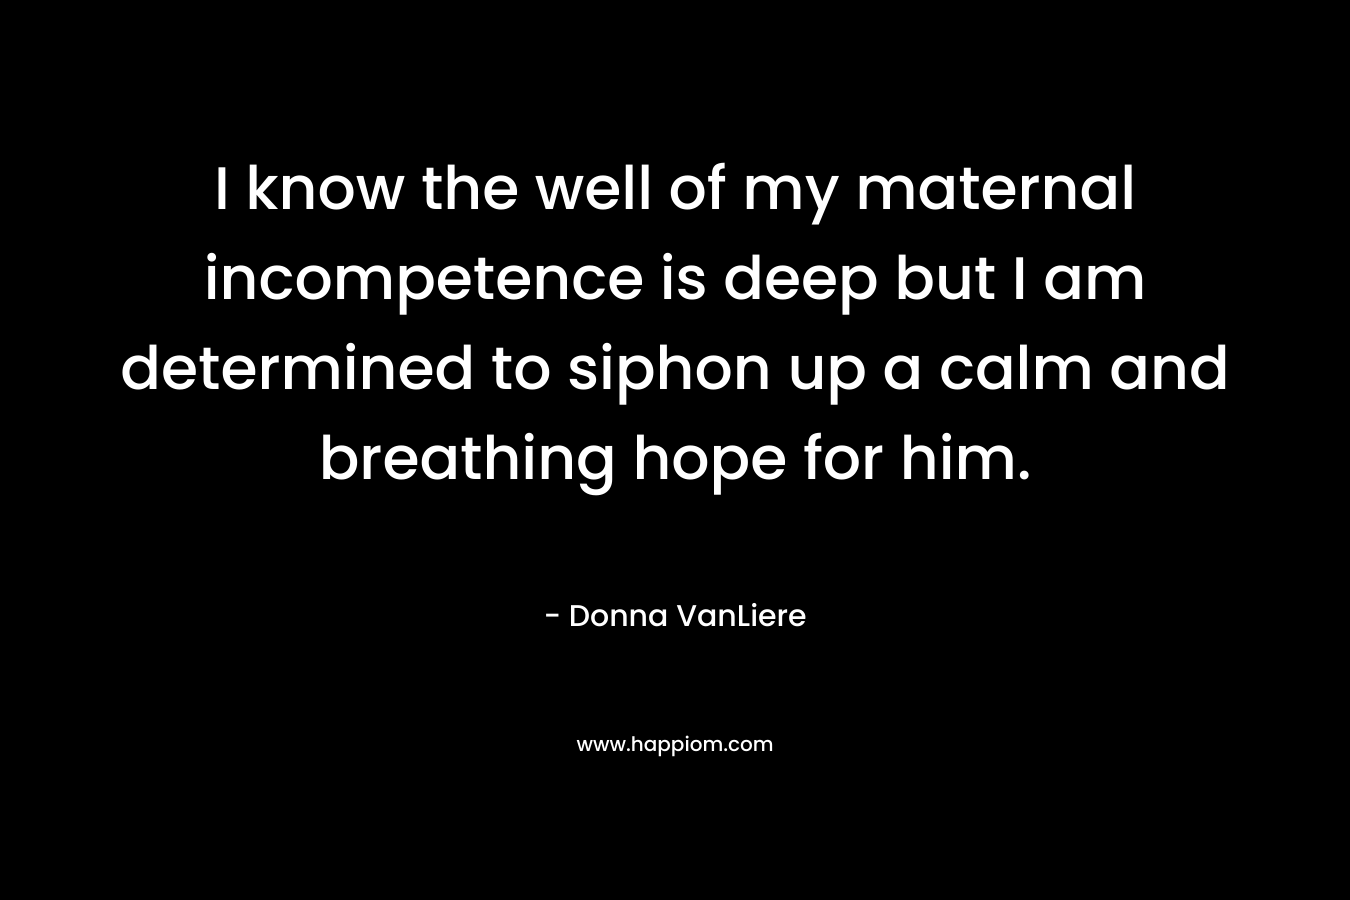 I know the well of my maternal incompetence is deep but I am determined to siphon up a calm and breathing hope for him. – Donna VanLiere